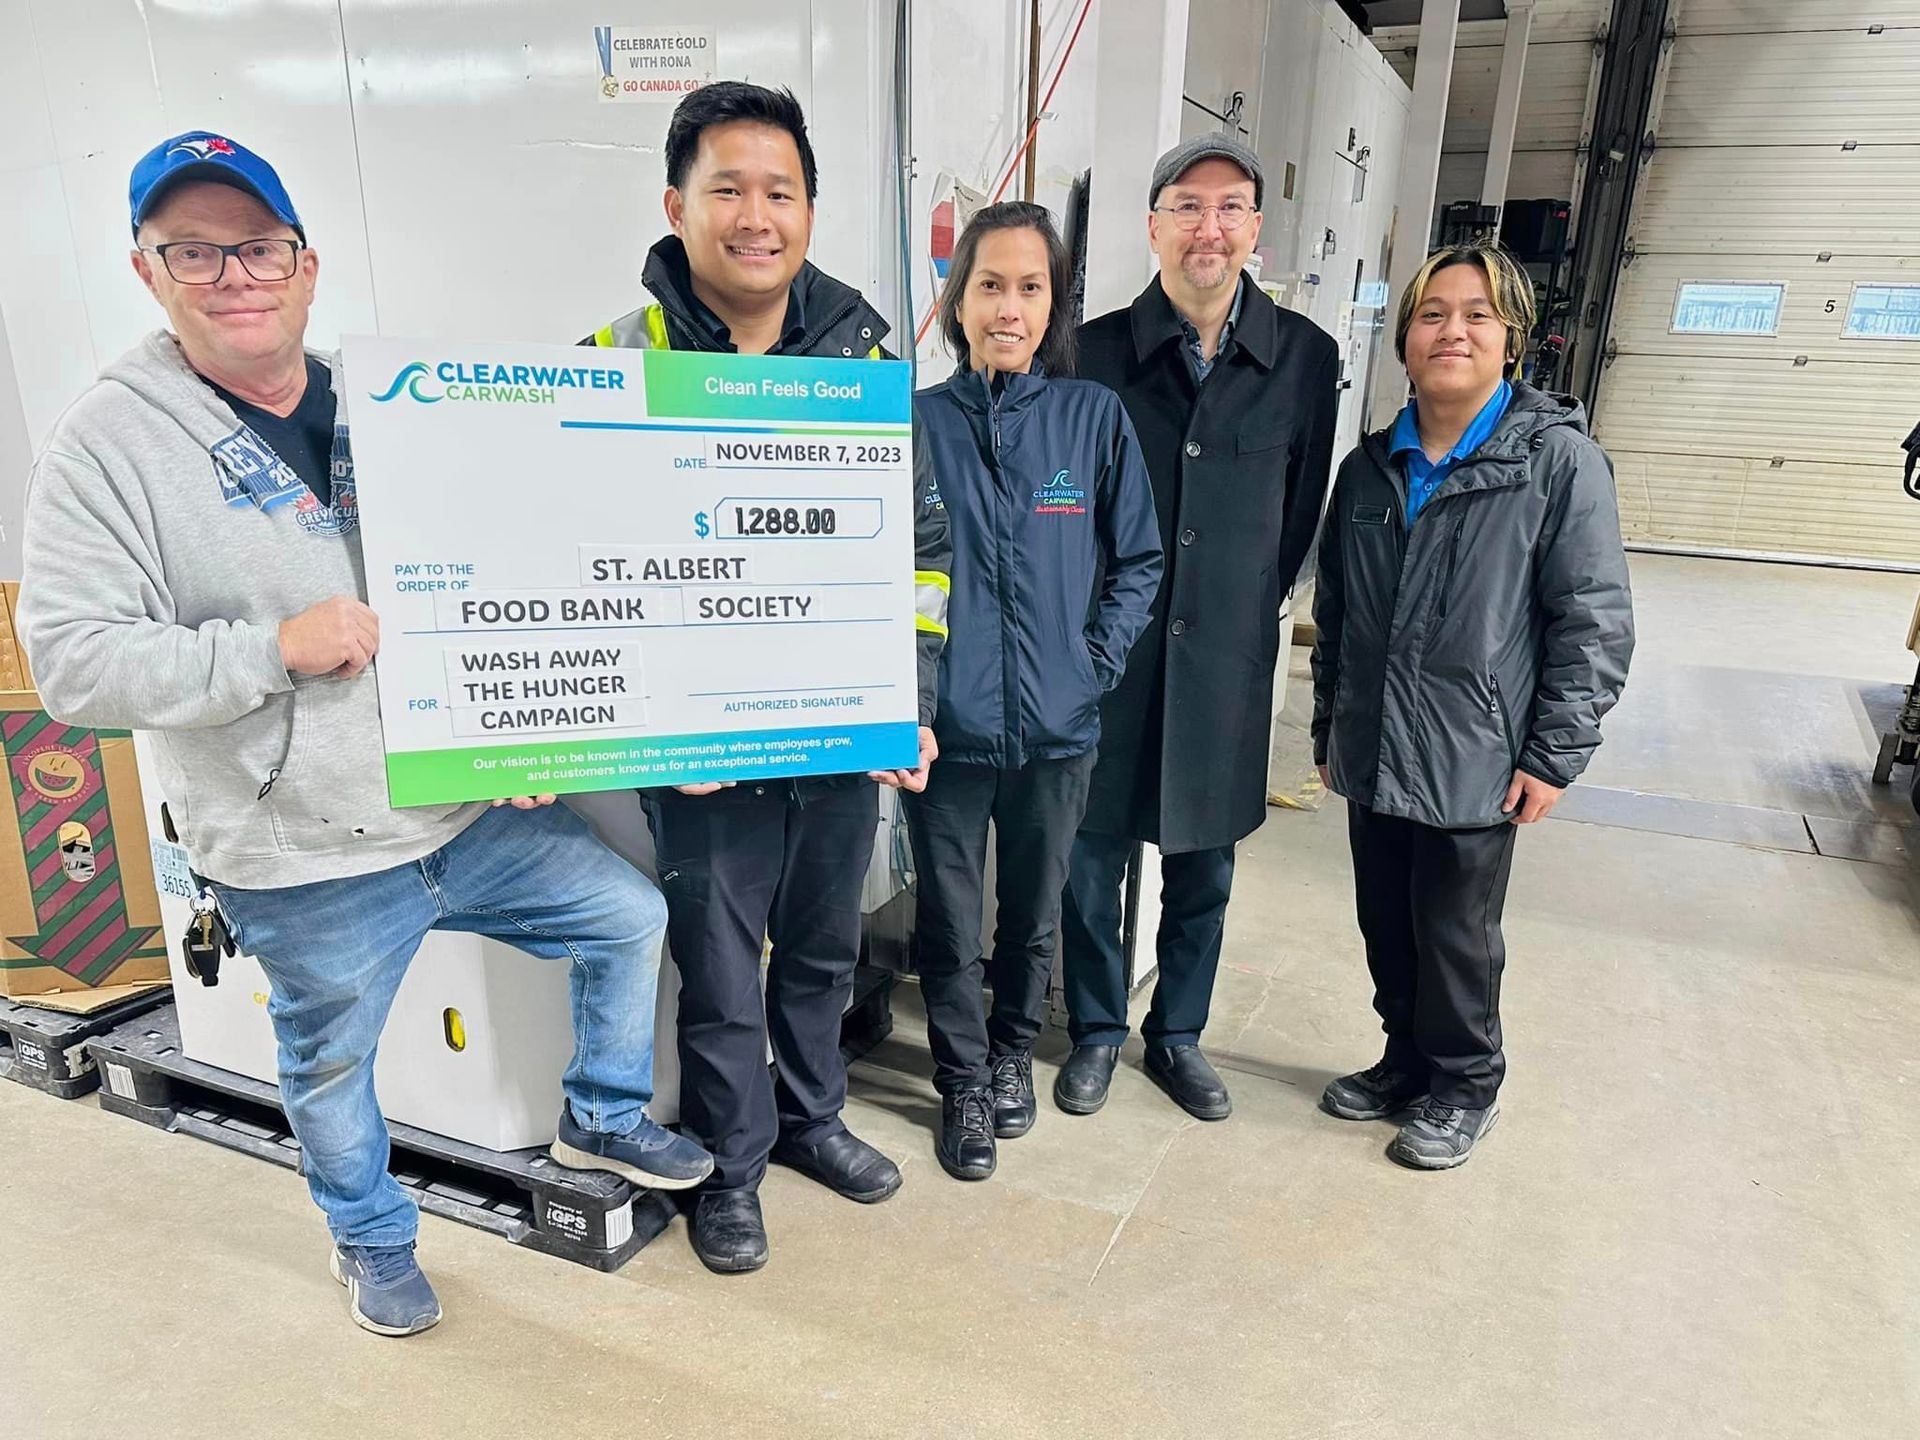 Clearwater team with donation check to St. Albert Food Bank